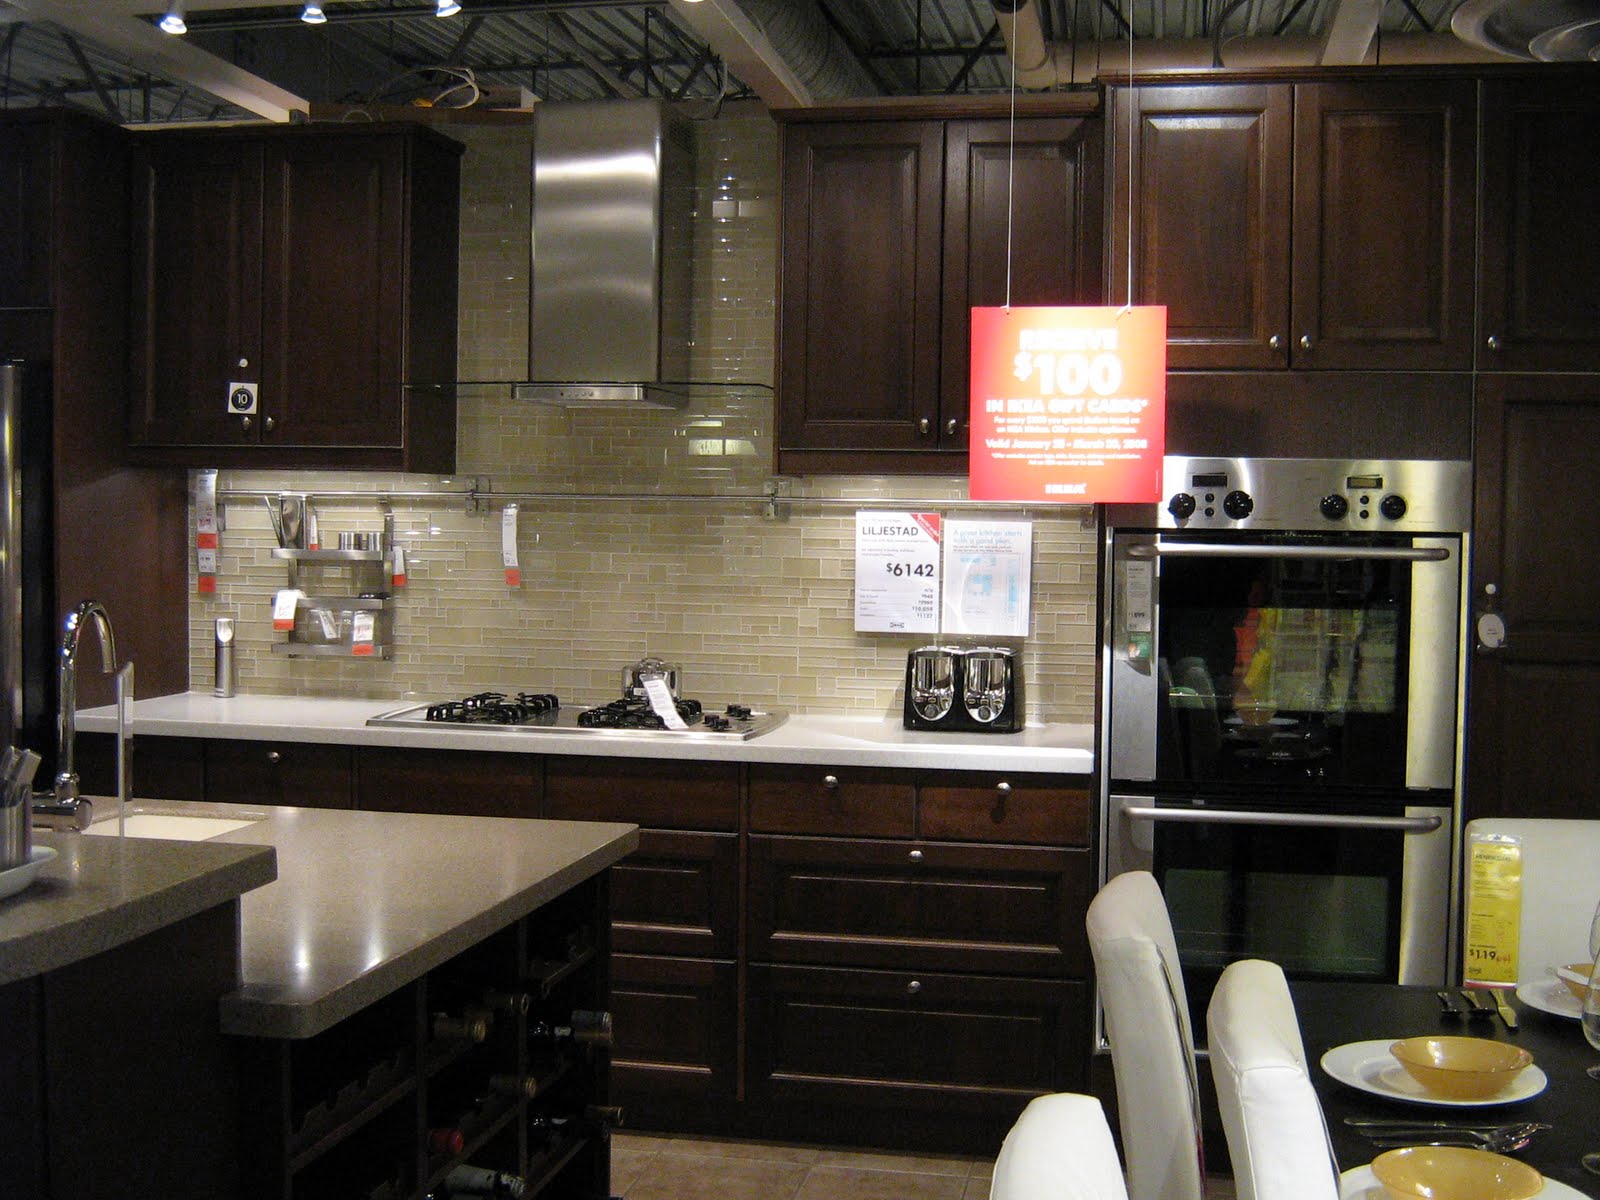 Pictures of IKEA Kitchens: Dark wood cabinets and light ...